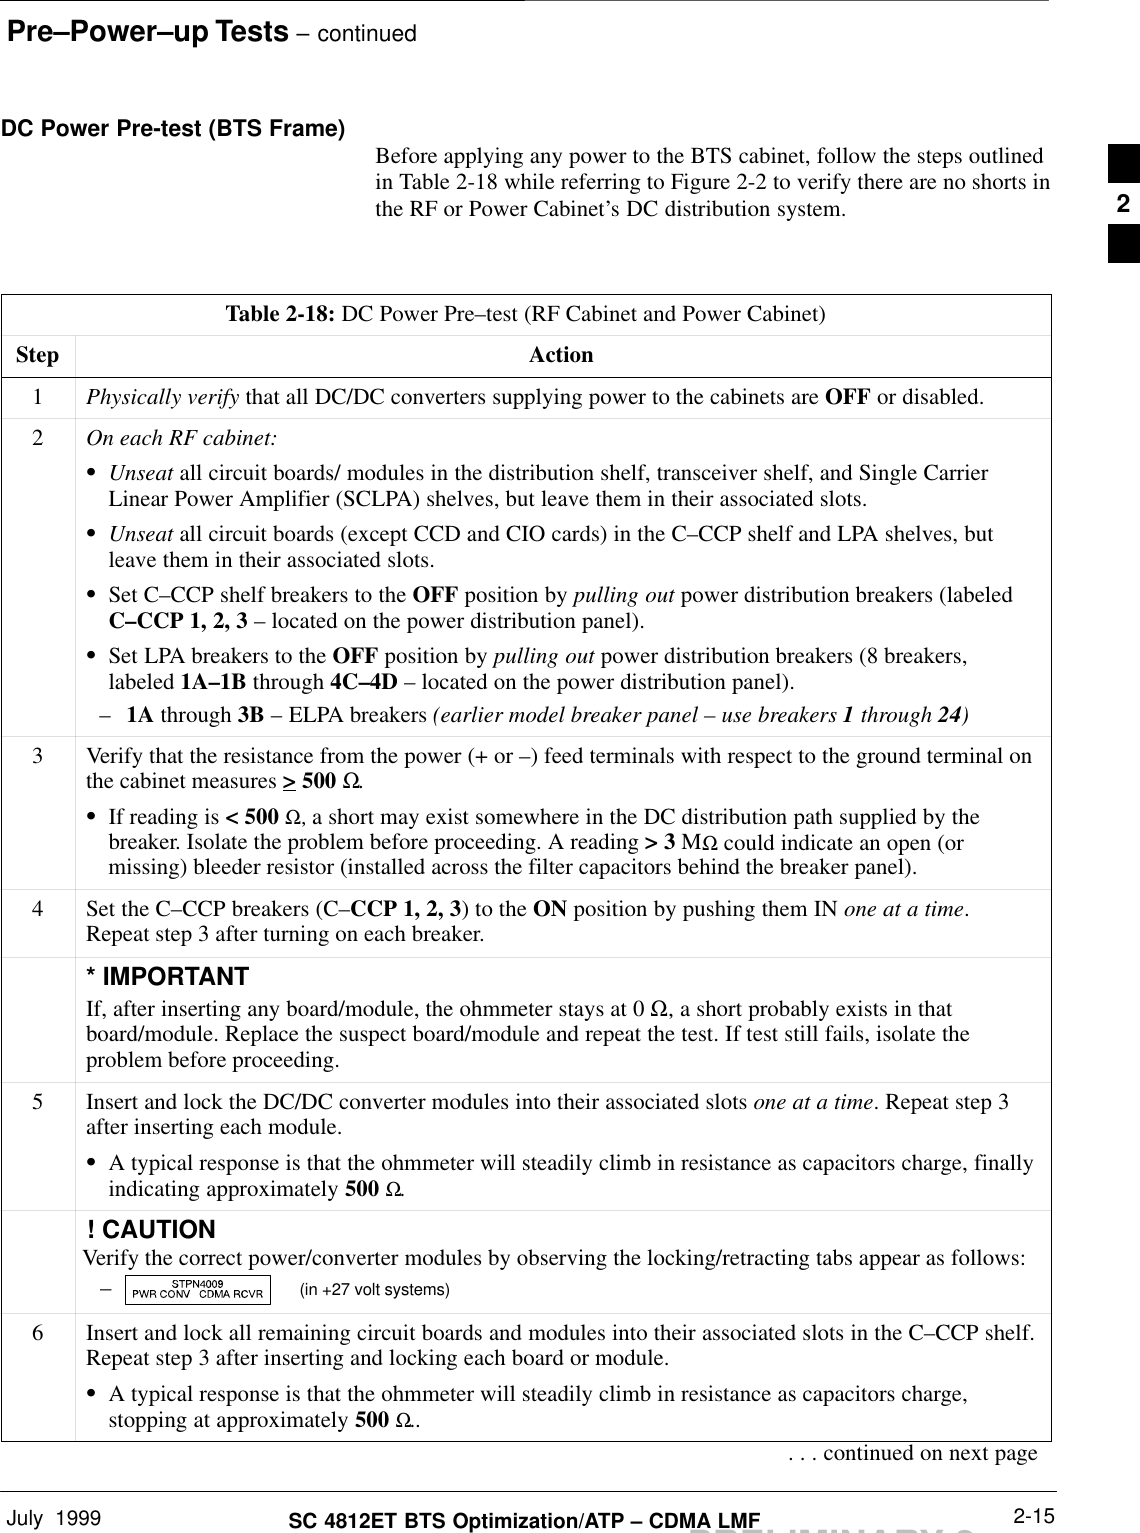 Pre–Power–up Tests – continuedJuly  1999 2-15SC 4812ET BTS Optimization/ATP – CDMA LMFPRELIMINARY 2DC Power Pre-test (BTS Frame) Before applying any power to the BTS cabinet, follow the steps outlinedin Table 2-18 while referring to Figure 2-2 to verify there are no shorts inthe RF or Power Cabinet’s DC distribution system.Table 2-18: DC Power Pre–test (RF Cabinet and Power Cabinet)Step Action1Physically verify that all DC/DC converters supplying power to the cabinets are OFF or disabled.2On each RF cabinet:SUnseat all circuit boards/ modules in the distribution shelf, transceiver shelf, and Single CarrierLinear Power Amplifier (SCLPA) shelves, but leave them in their associated slots.SUnseat all circuit boards (except CCD and CIO cards) in the C–CCP shelf and LPA shelves, butleave them in their associated slots.SSet C–CCP shelf breakers to the OFF position by pulling out power distribution breakers (labeledC–CCP 1, 2, 3 – located on the power distribution panel).SSet LPA breakers to the OFF position by pulling out power distribution breakers (8 breakers,labeled 1A–1B through 4C–4D – located on the power distribution panel).–1A through 3B – ELPA breakers (earlier model breaker panel – use breakers 1 through 24)3Verify that the resistance from the power (+ or –) feed terminals with respect to the ground terminal onthe cabinet measures &gt; 500 Ω.SIf reading is &lt; 500 Ω, a short may exist somewhere in the DC distribution path supplied by thebreaker. Isolate the problem before proceeding. A reading &gt; 3 MΩ could indicate an open (ormissing) bleeder resistor (installed across the filter capacitors behind the breaker panel).4Set the C–CCP breakers (C–CCP 1, 2, 3) to the ON position by pushing them IN one at a time.Repeat step 3 after turning on each breaker.* IMPORTANTIf, after inserting any board/module, the ohmmeter stays at 0 Ω, a short probably exists in thatboard/module. Replace the suspect board/module and repeat the test. If test still fails, isolate theproblem before proceeding.5Insert and lock the DC/DC converter modules into their associated slots one at a time. Repeat step 3after inserting each module.SA typical response is that the ohmmeter will steadily climb in resistance as capacitors charge, finallyindicating approximately 500 Ω.! CAUTIONVerify the correct power/converter modules by observing the locking/retracting tabs appear as follows:–  (in +27 volt systems)6Insert and lock all remaining circuit boards and modules into their associated slots in the C–CCP shelf.Repeat step 3 after inserting and locking each board or module.SA typical response is that the ohmmeter will steadily climb in resistance as capacitors charge,stopping at approximately 500 Ω... . . continued on next page2